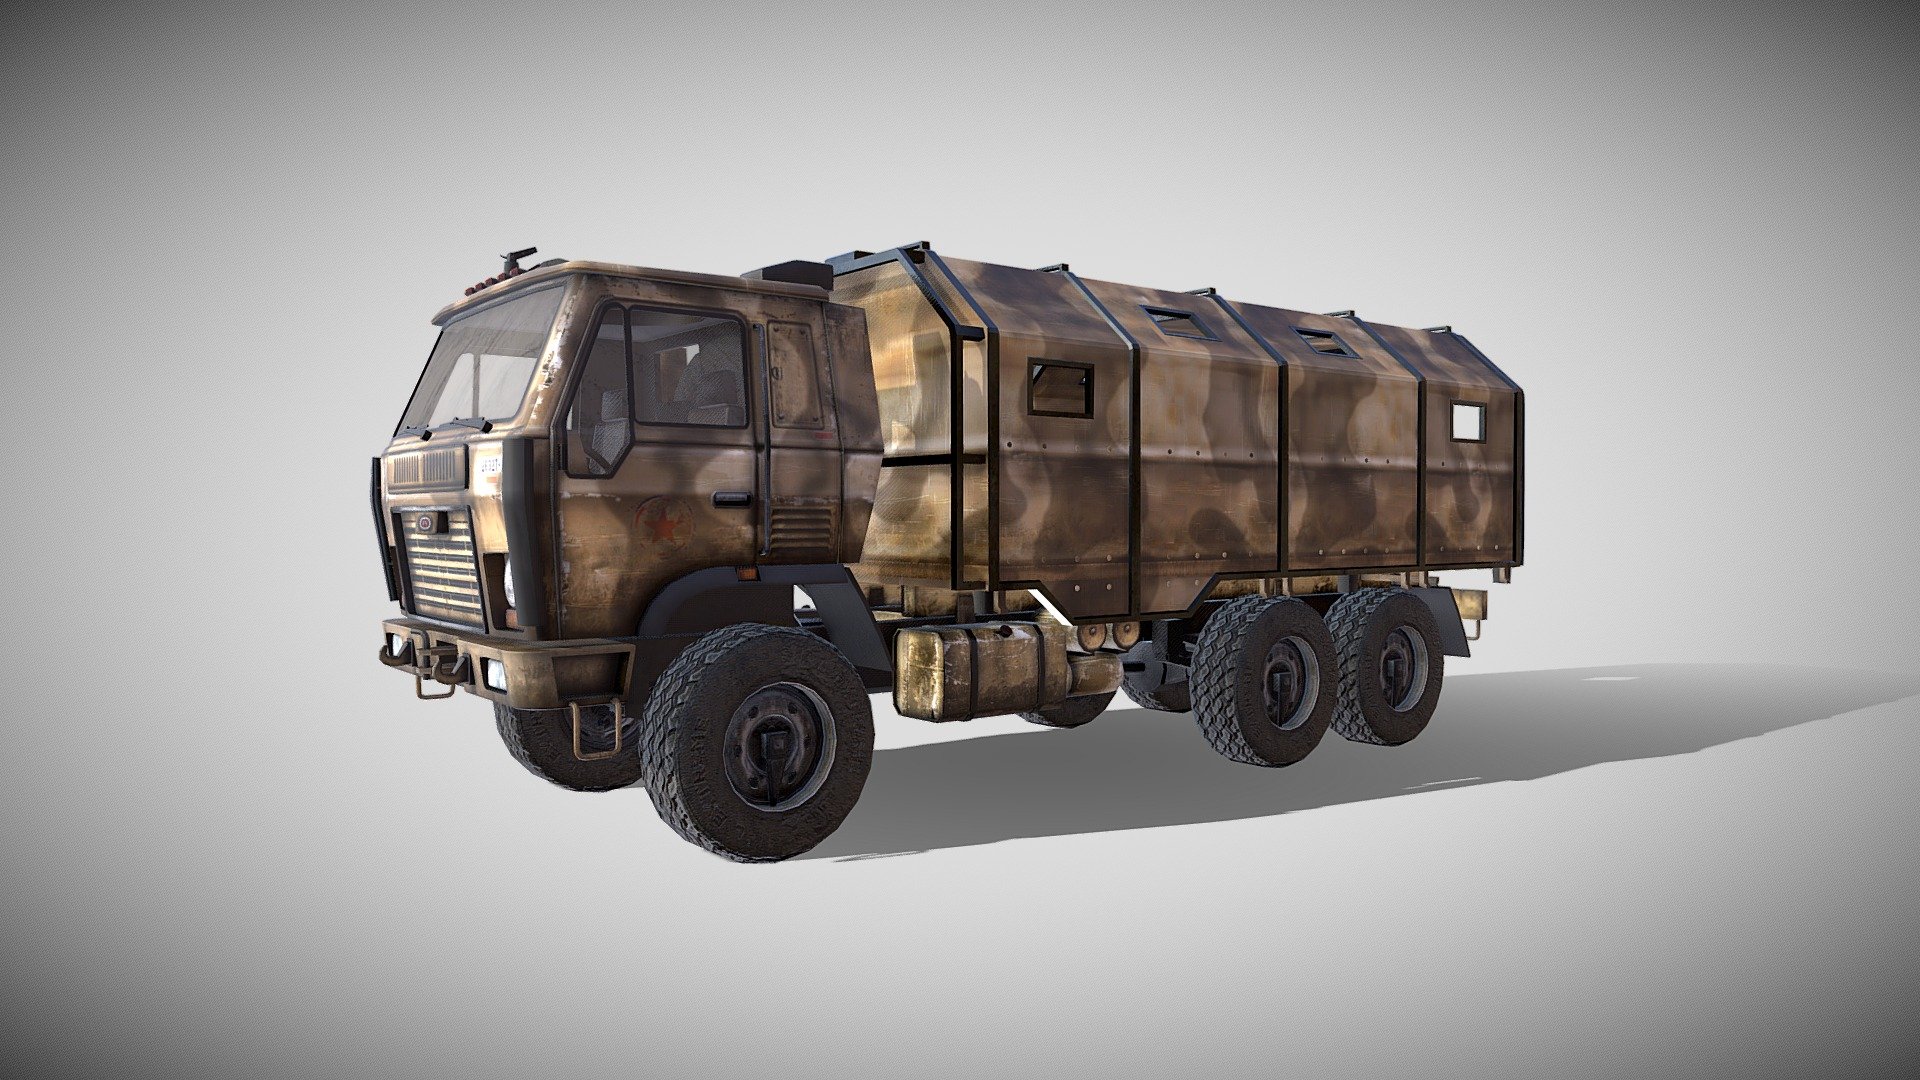 Military trucks, military truck, armored vehicle model, film and television animation model = = = = = = = = = = = = = = = = = = = = = = = = = = = = = = = = = = = = = = = = = = = = = = = = Other works ~ welcome to visit my home page - Armored vehicle transporter armored truck - Buy Royalty Free 3D model by mpc199075 3d model